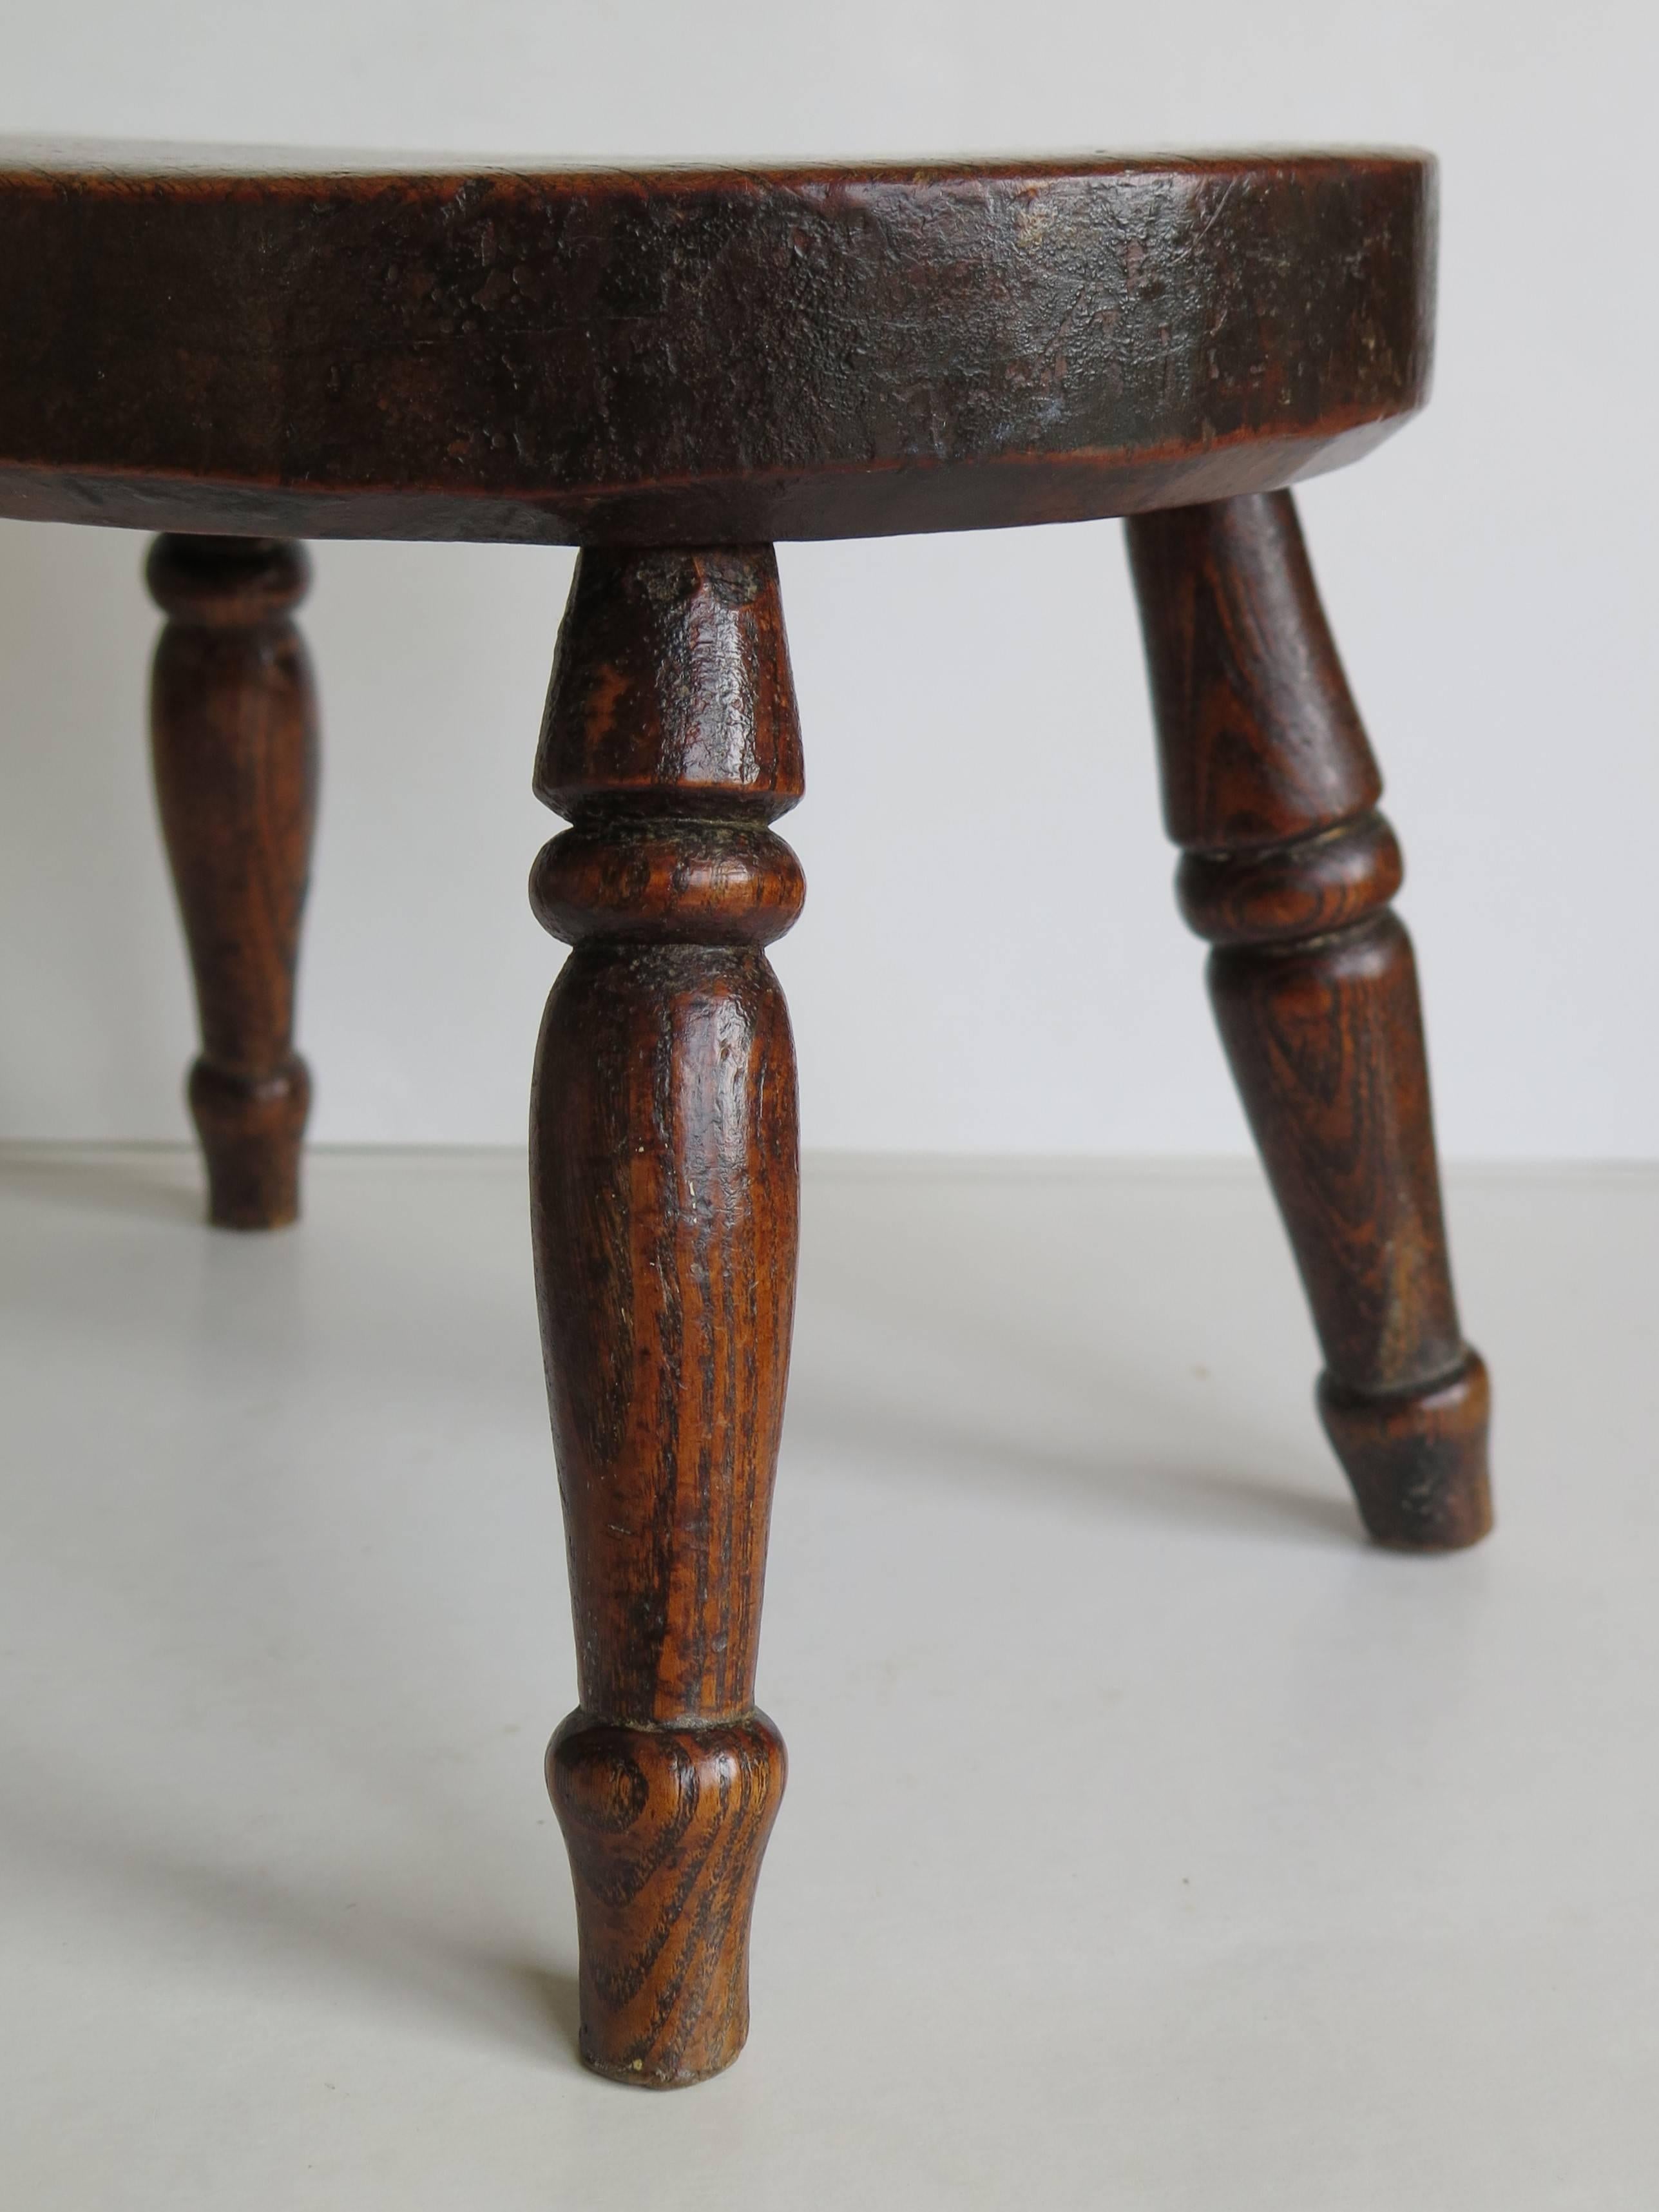 LOVELY SMALL VICTORIAN STYLE ELM CANDLE STAND/ STOOL 